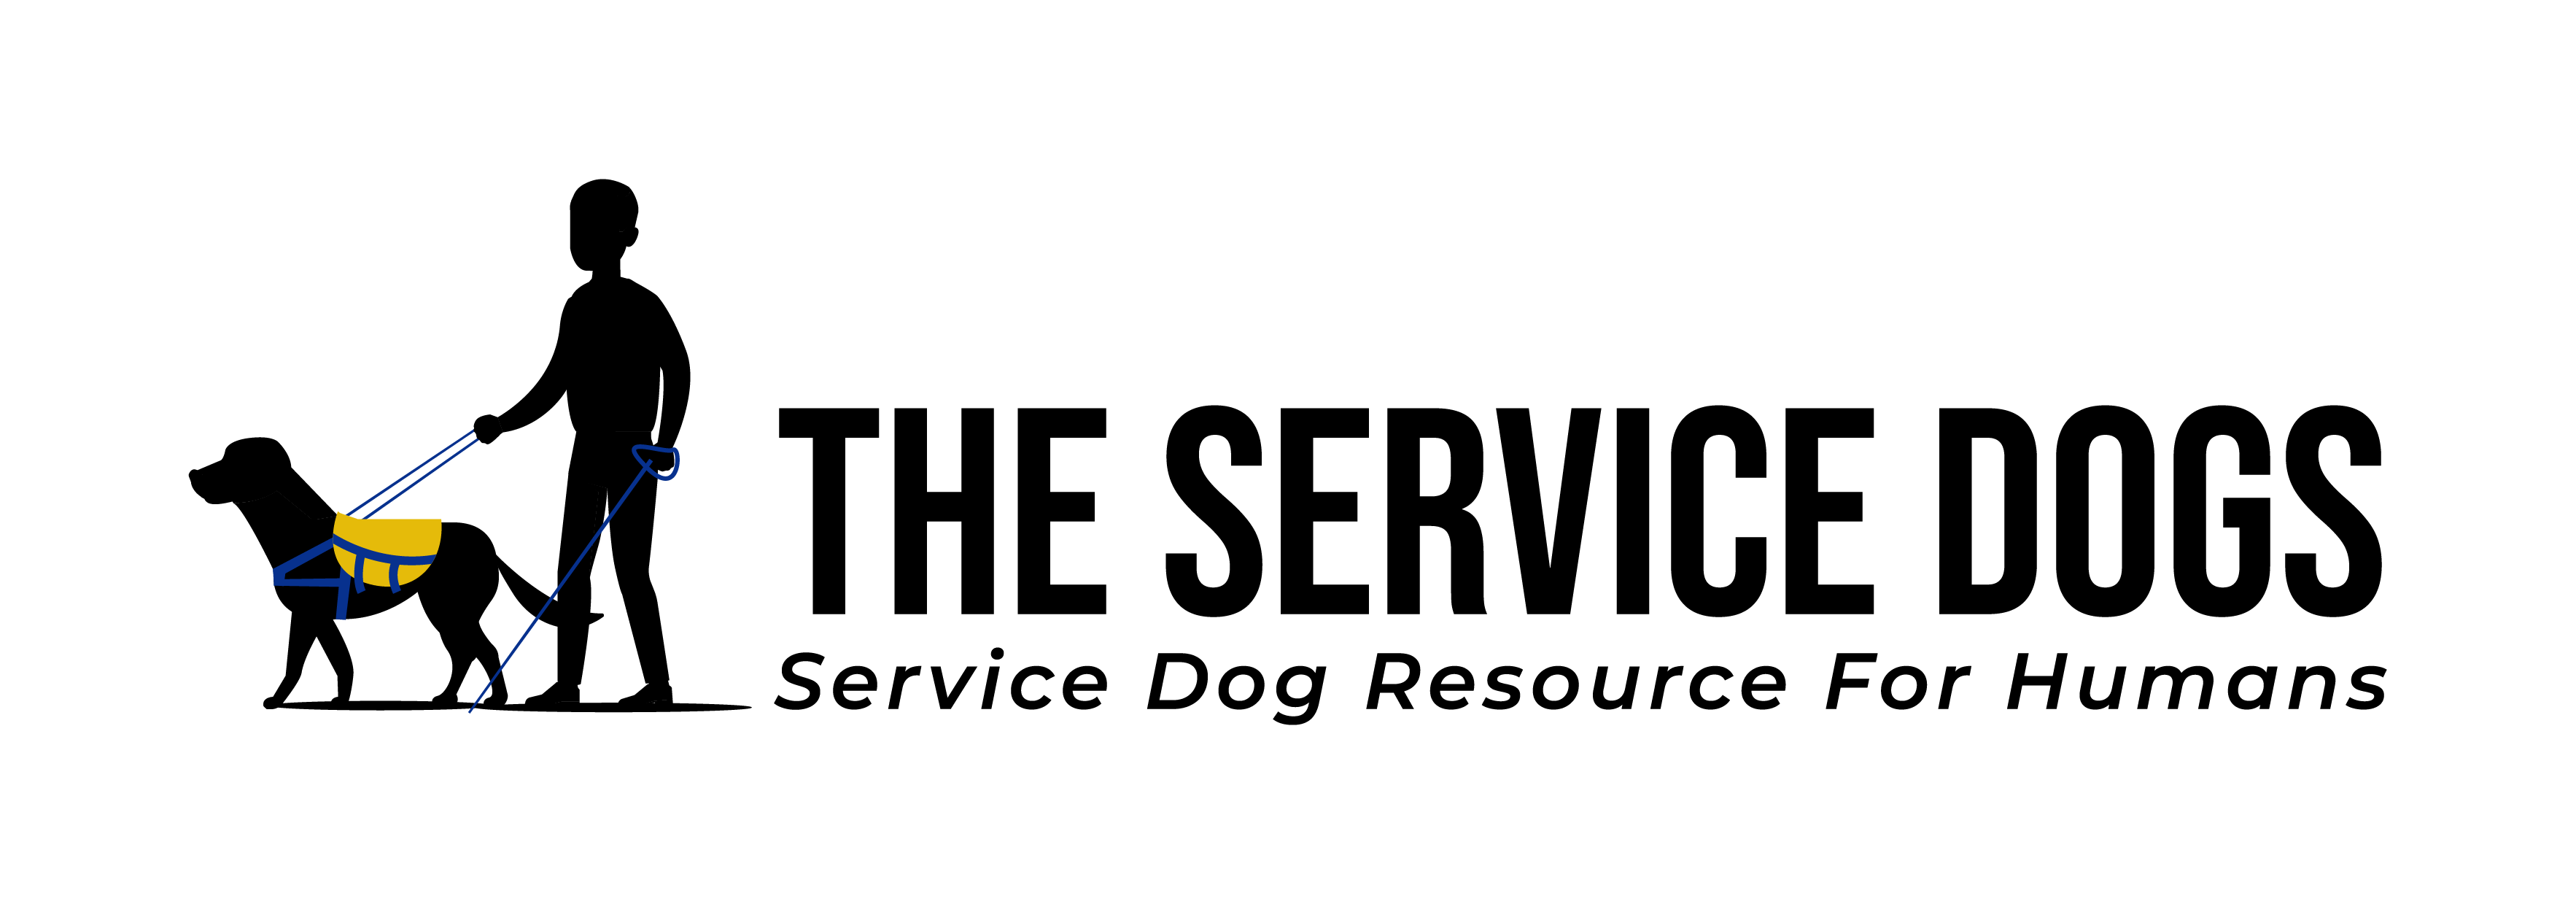 the service dogs